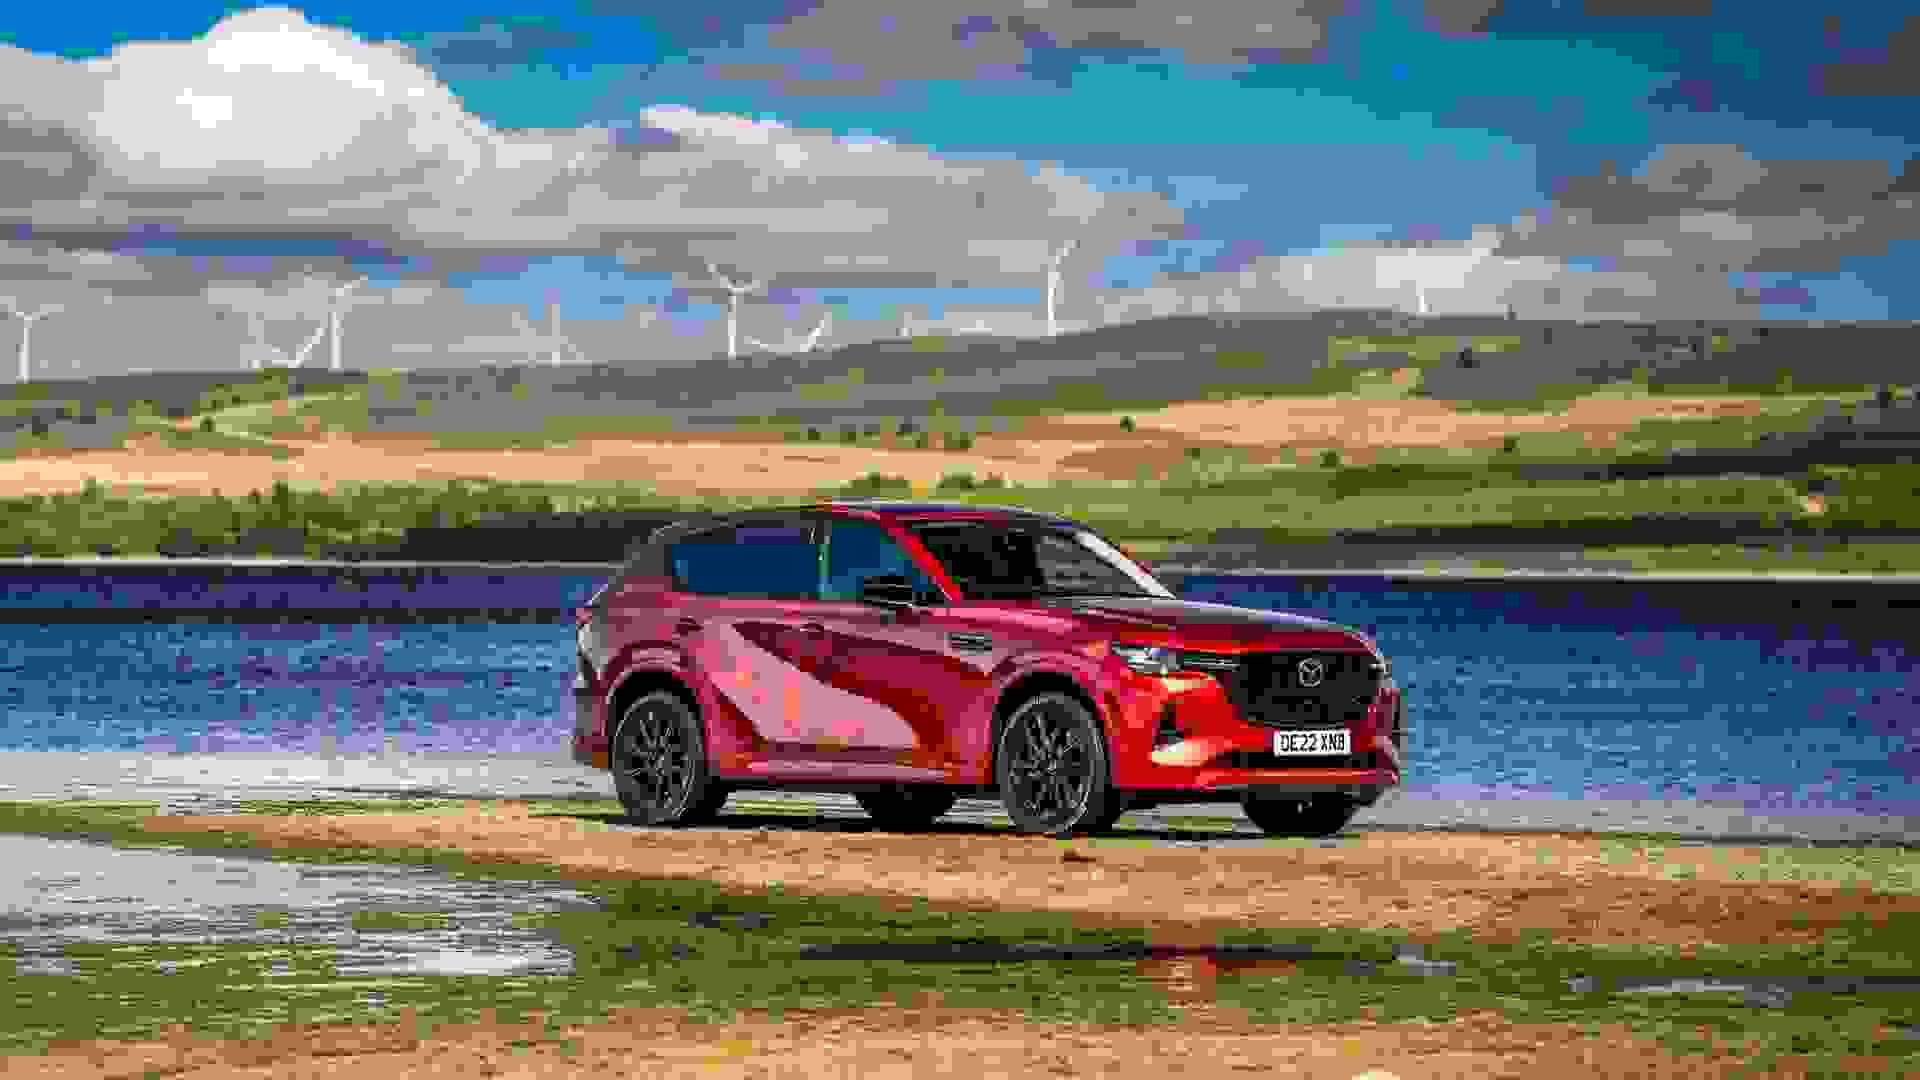 Red rear-wheel drive SUV in front of lake